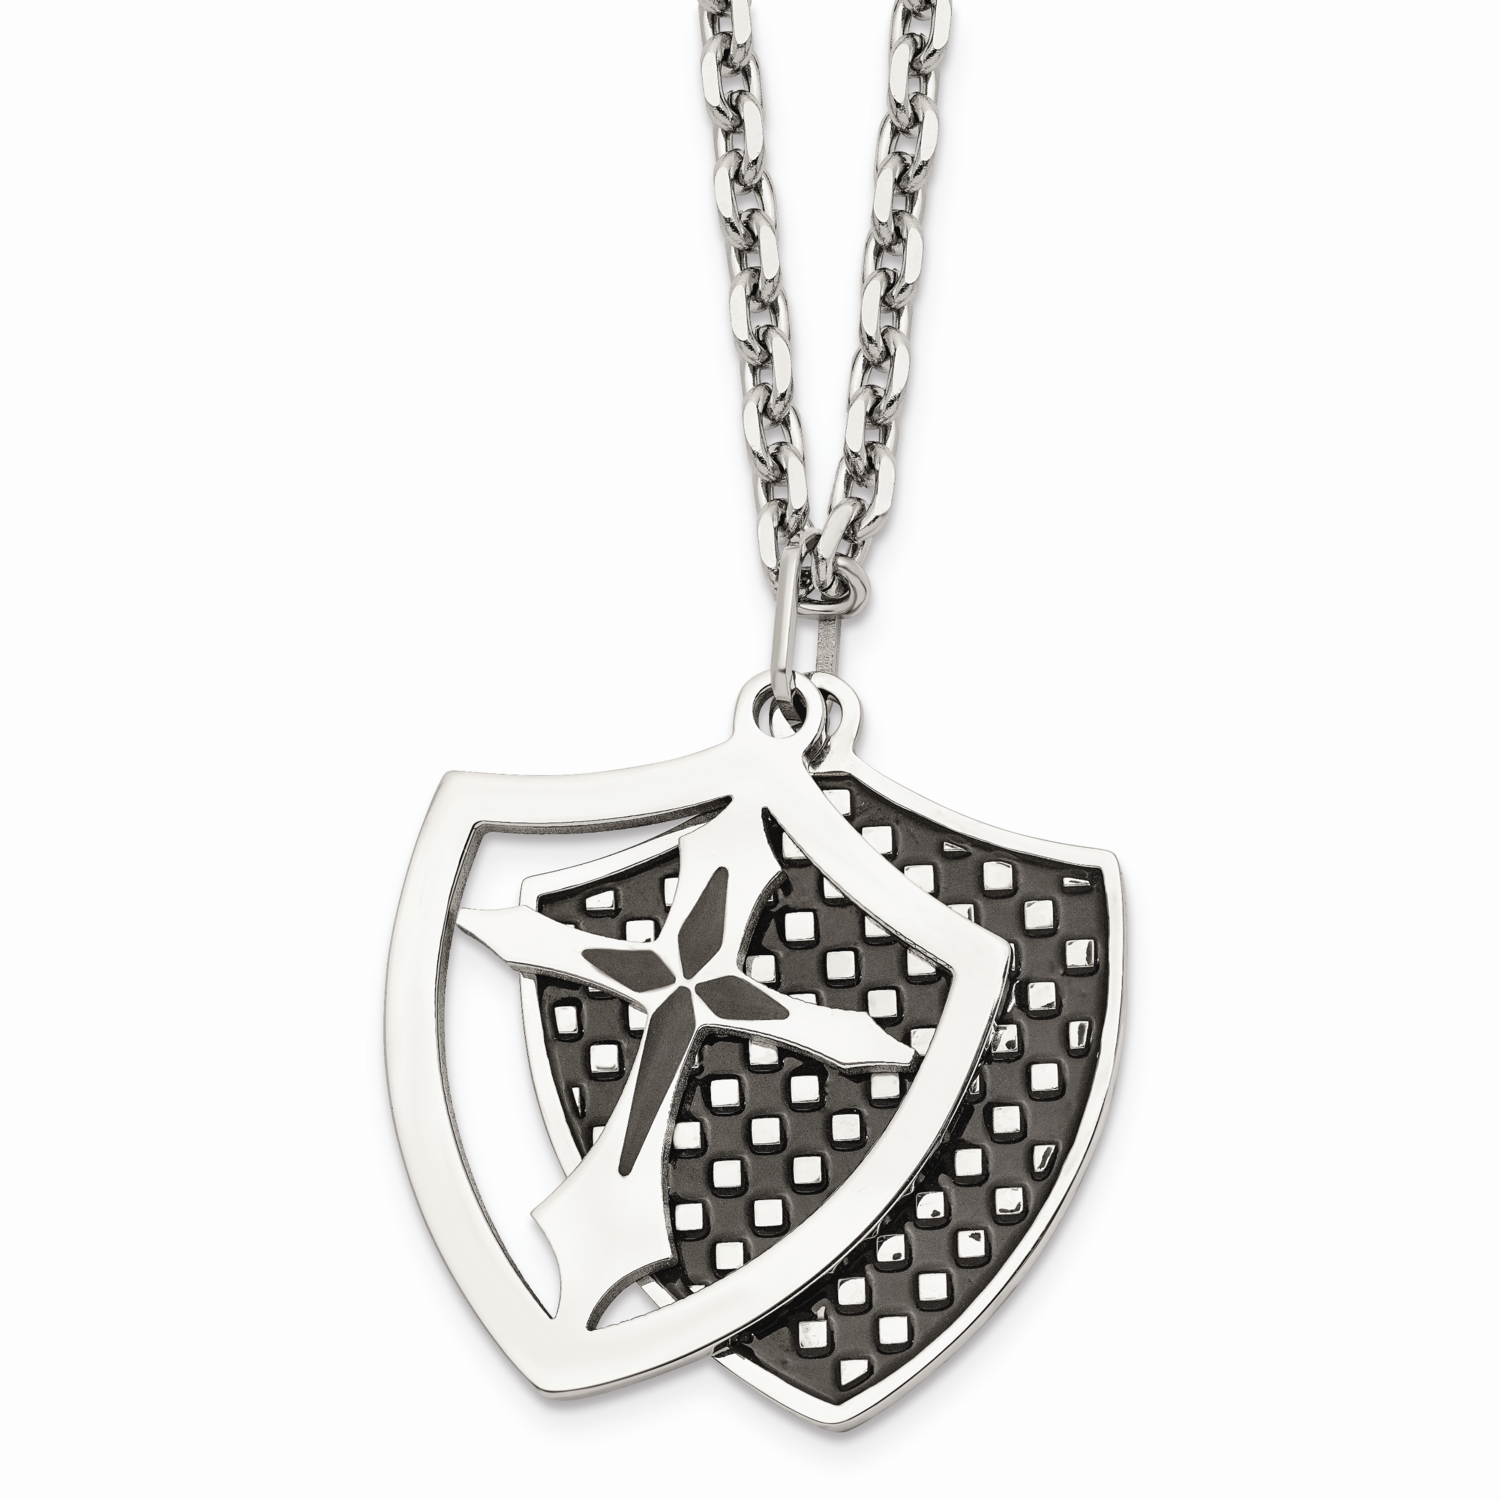 IP Black Plated Moveable Shield Pendant Necklace Stainless Steel SRN834-22